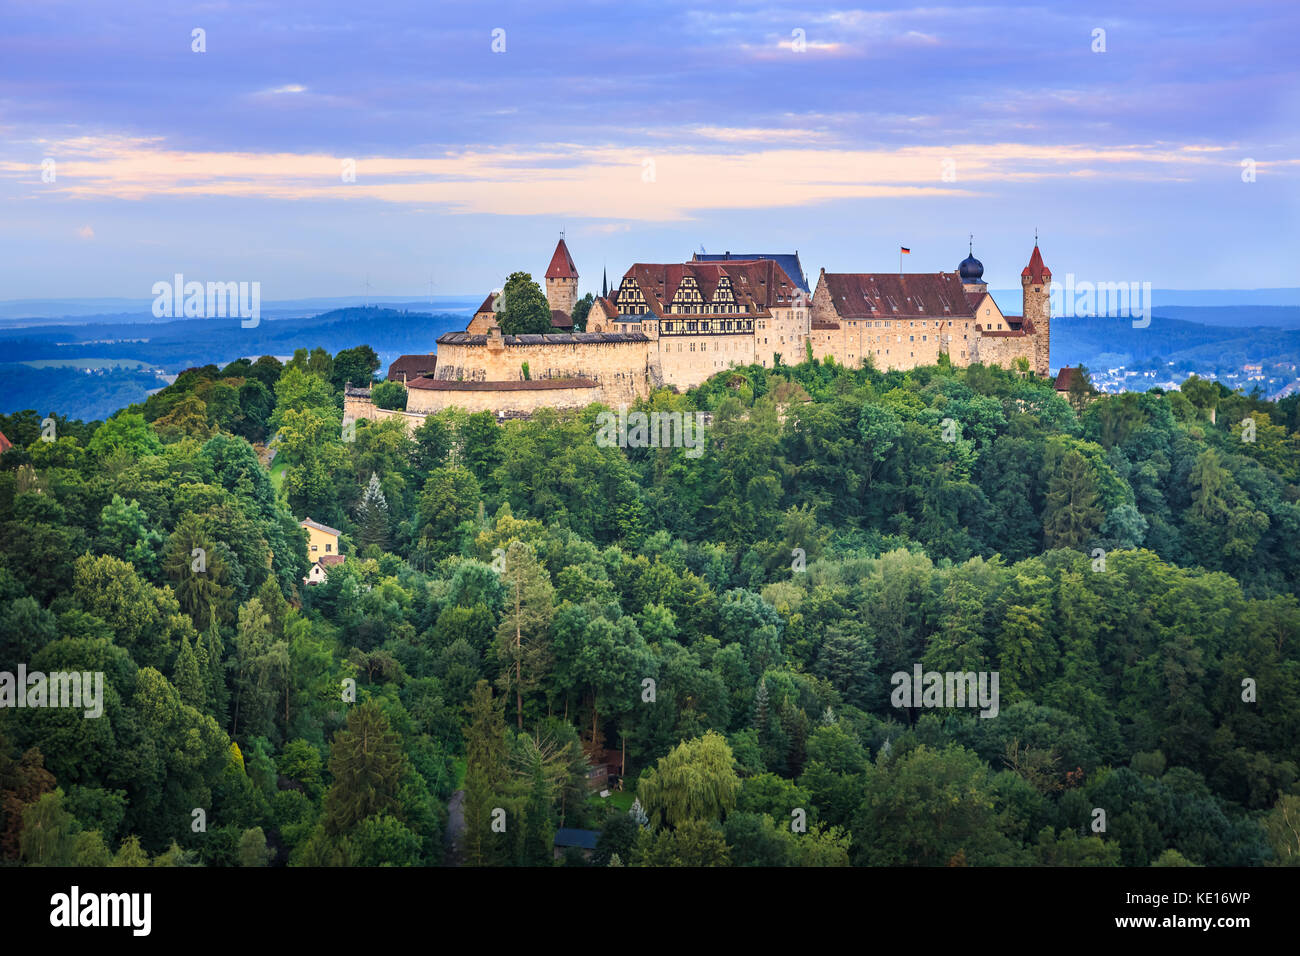 Air view of Veste fortress in Coburg, Bavaria, Germany Stock Photo